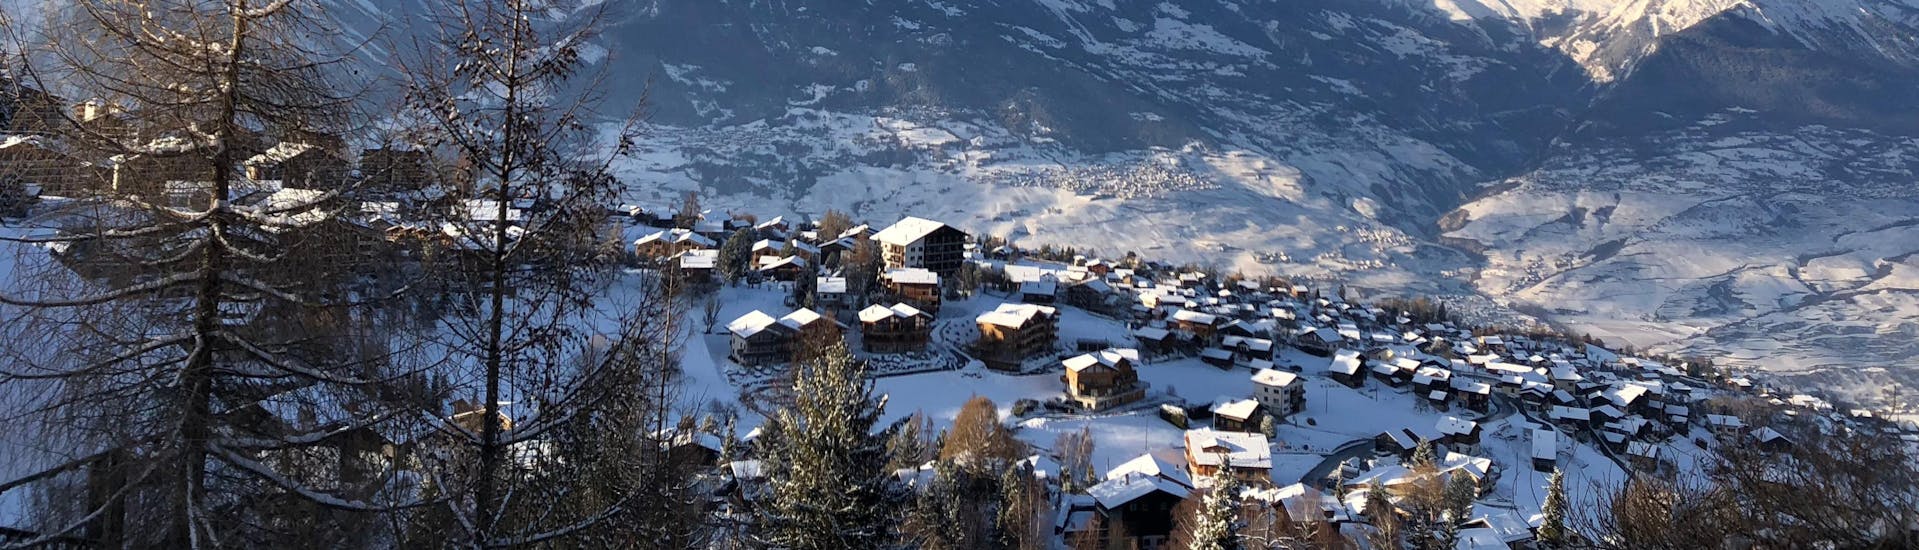 An aereal view of the ski resort of Nendaz, a popular destination in the French-speaking part of Switzerland, where visitors can book ski lessons with one of the local ski schools.